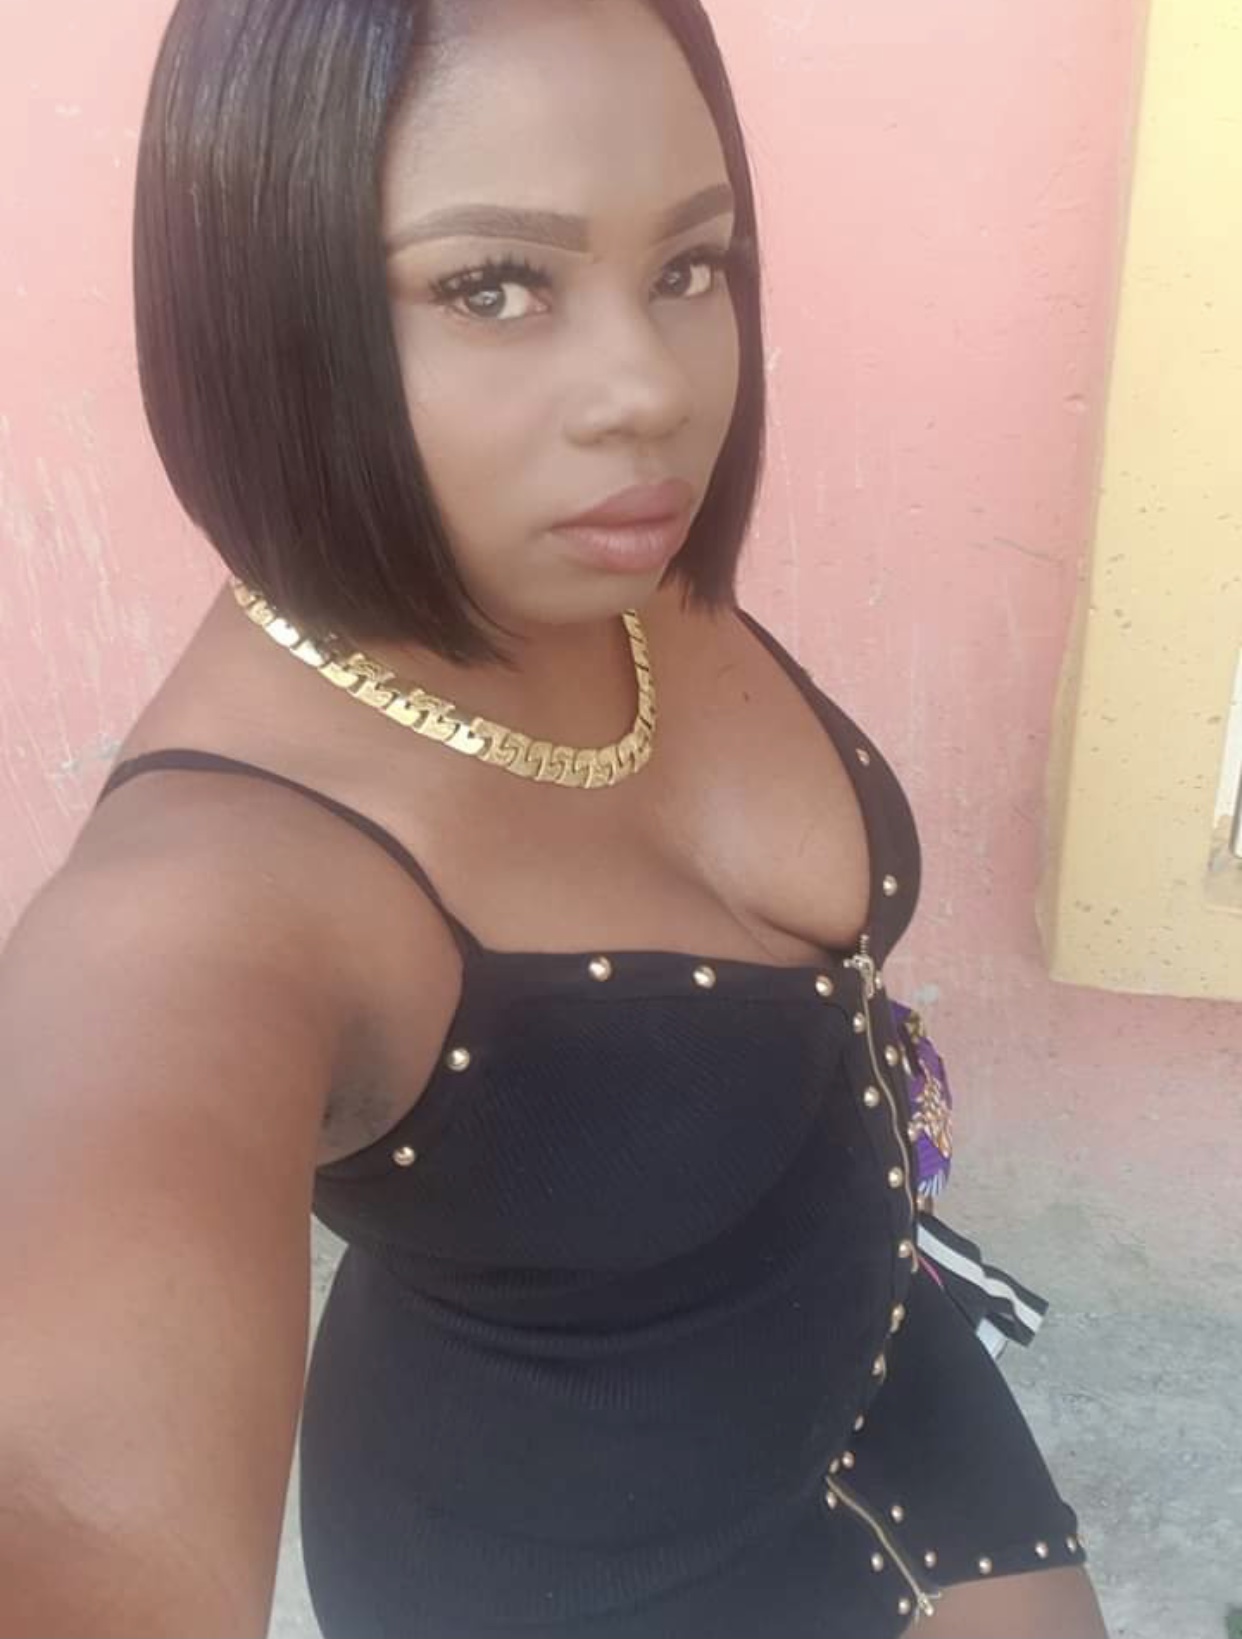 Woman shot dead in Laventille drive by shooting